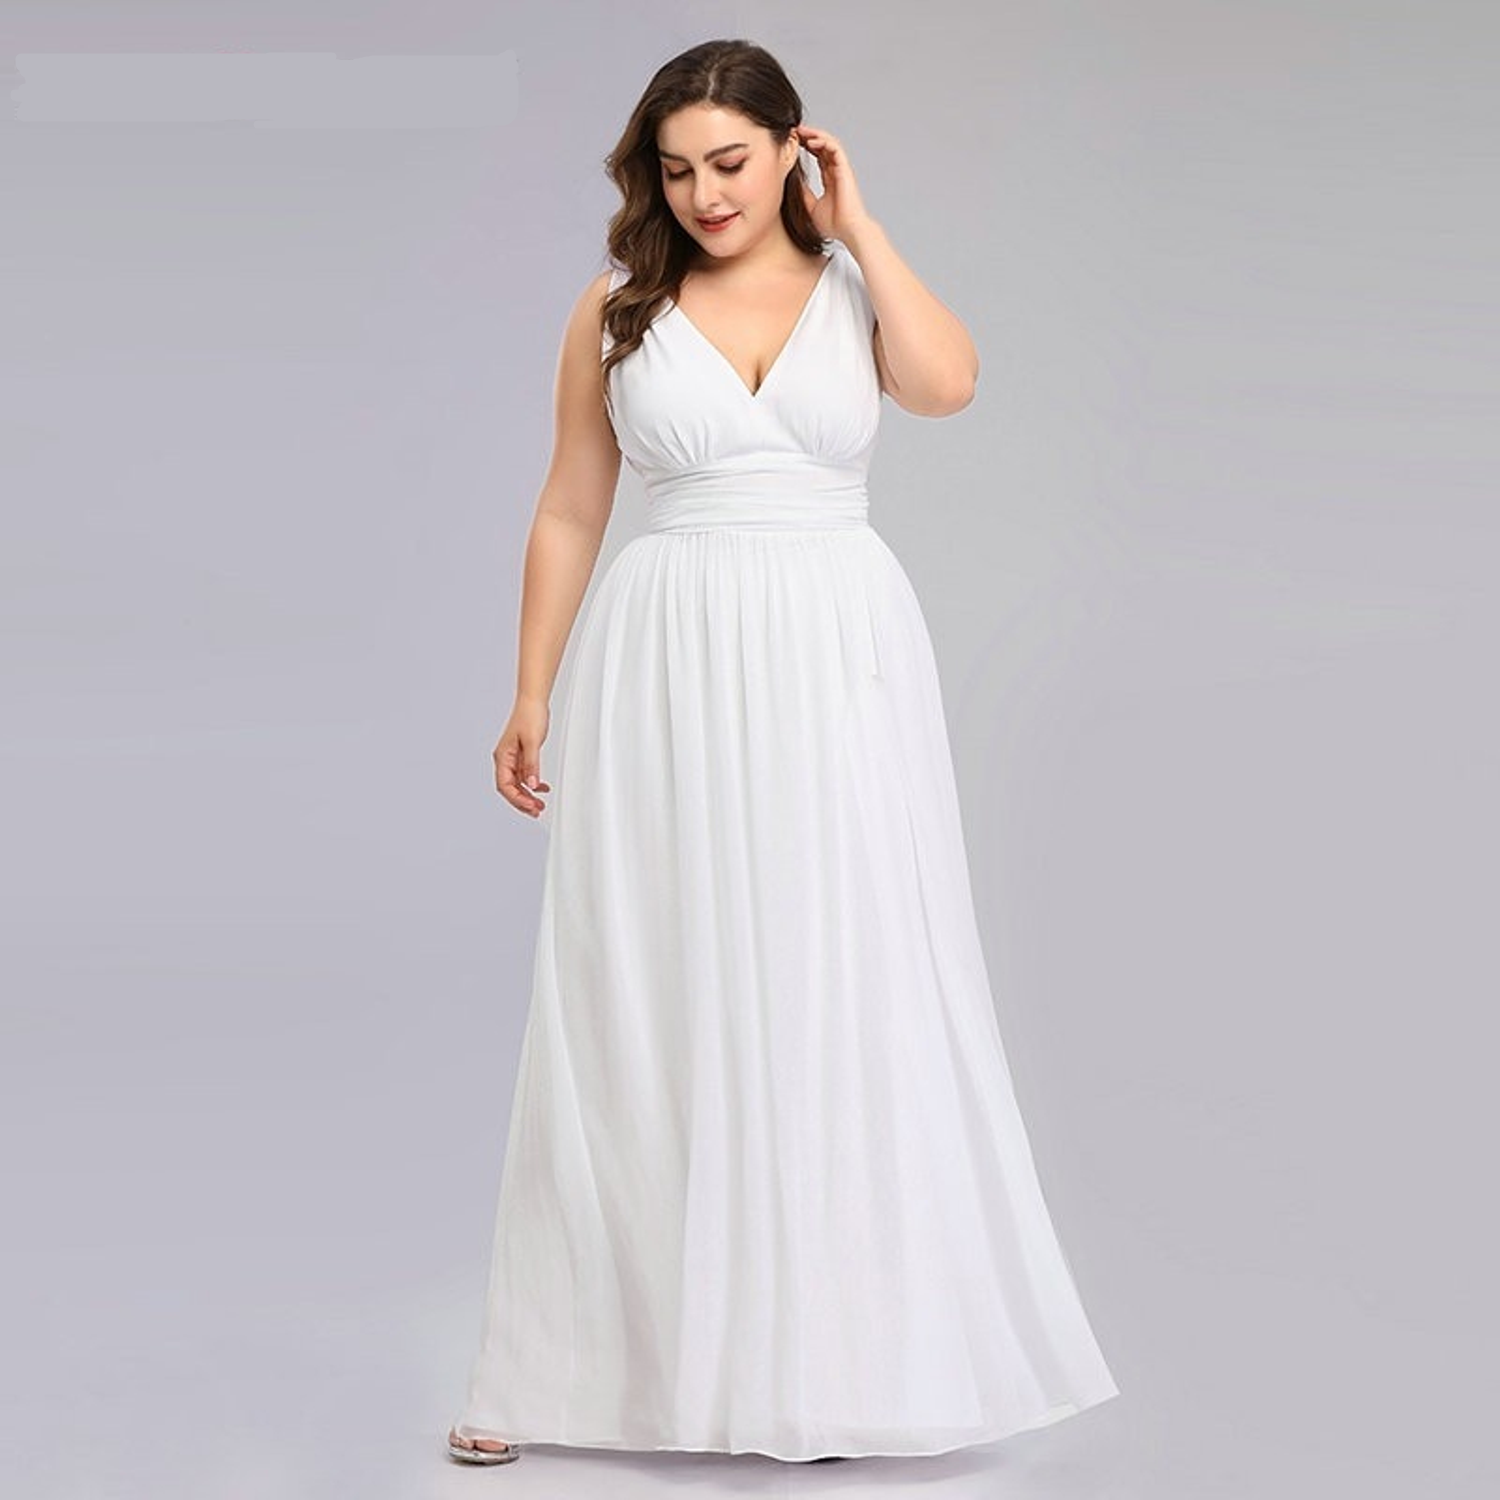 11 Amazing And Affordable Ideas Of Plus Size Wedding Dresses The Best Wedding Dresses